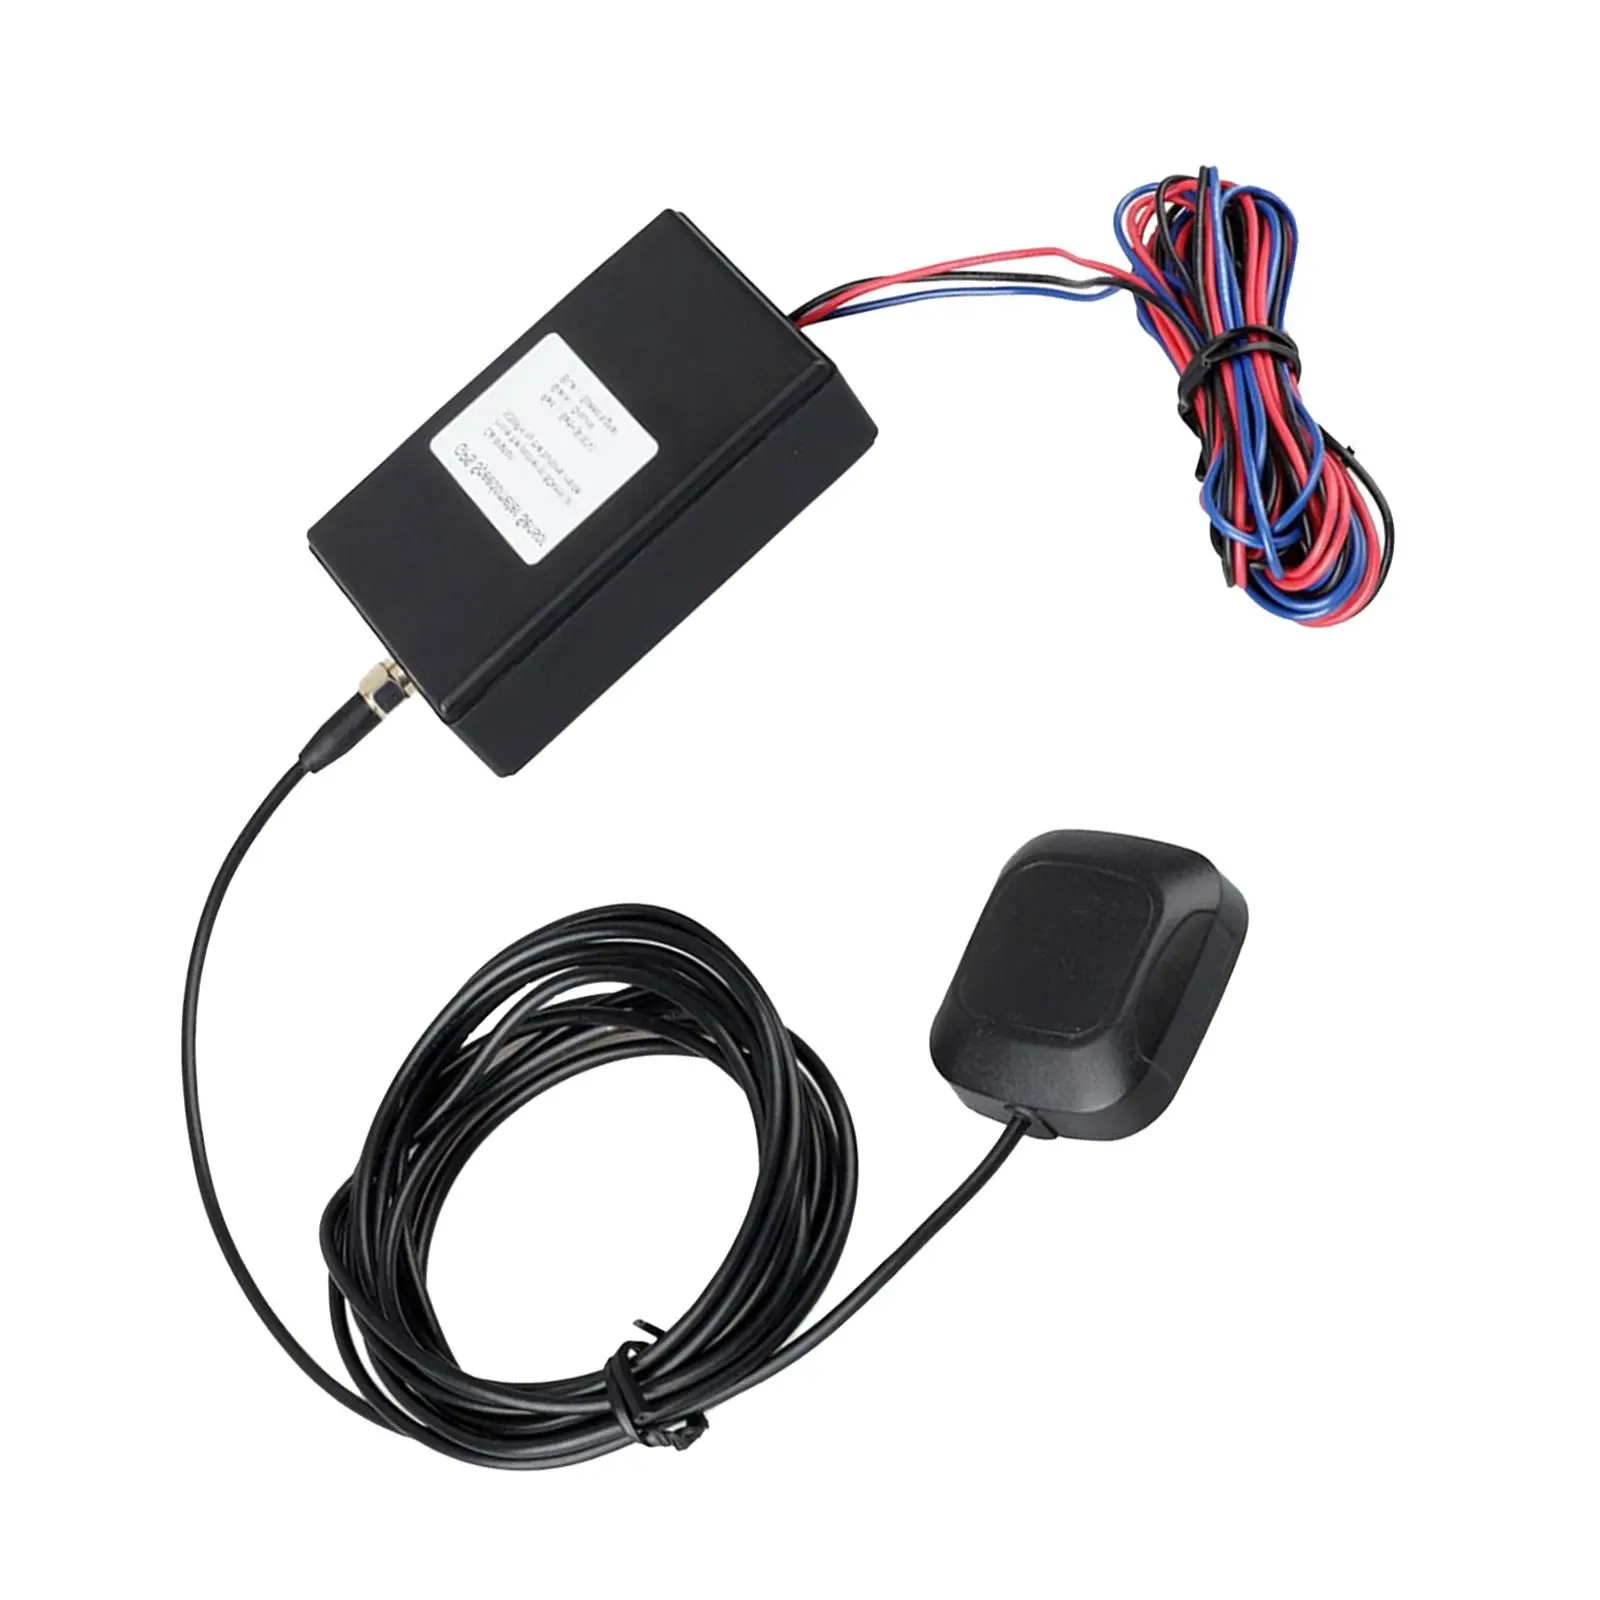 GPS Speedometer Sensor For Vehicle Motorcycle Replacement Parts Accessories Easy to Install